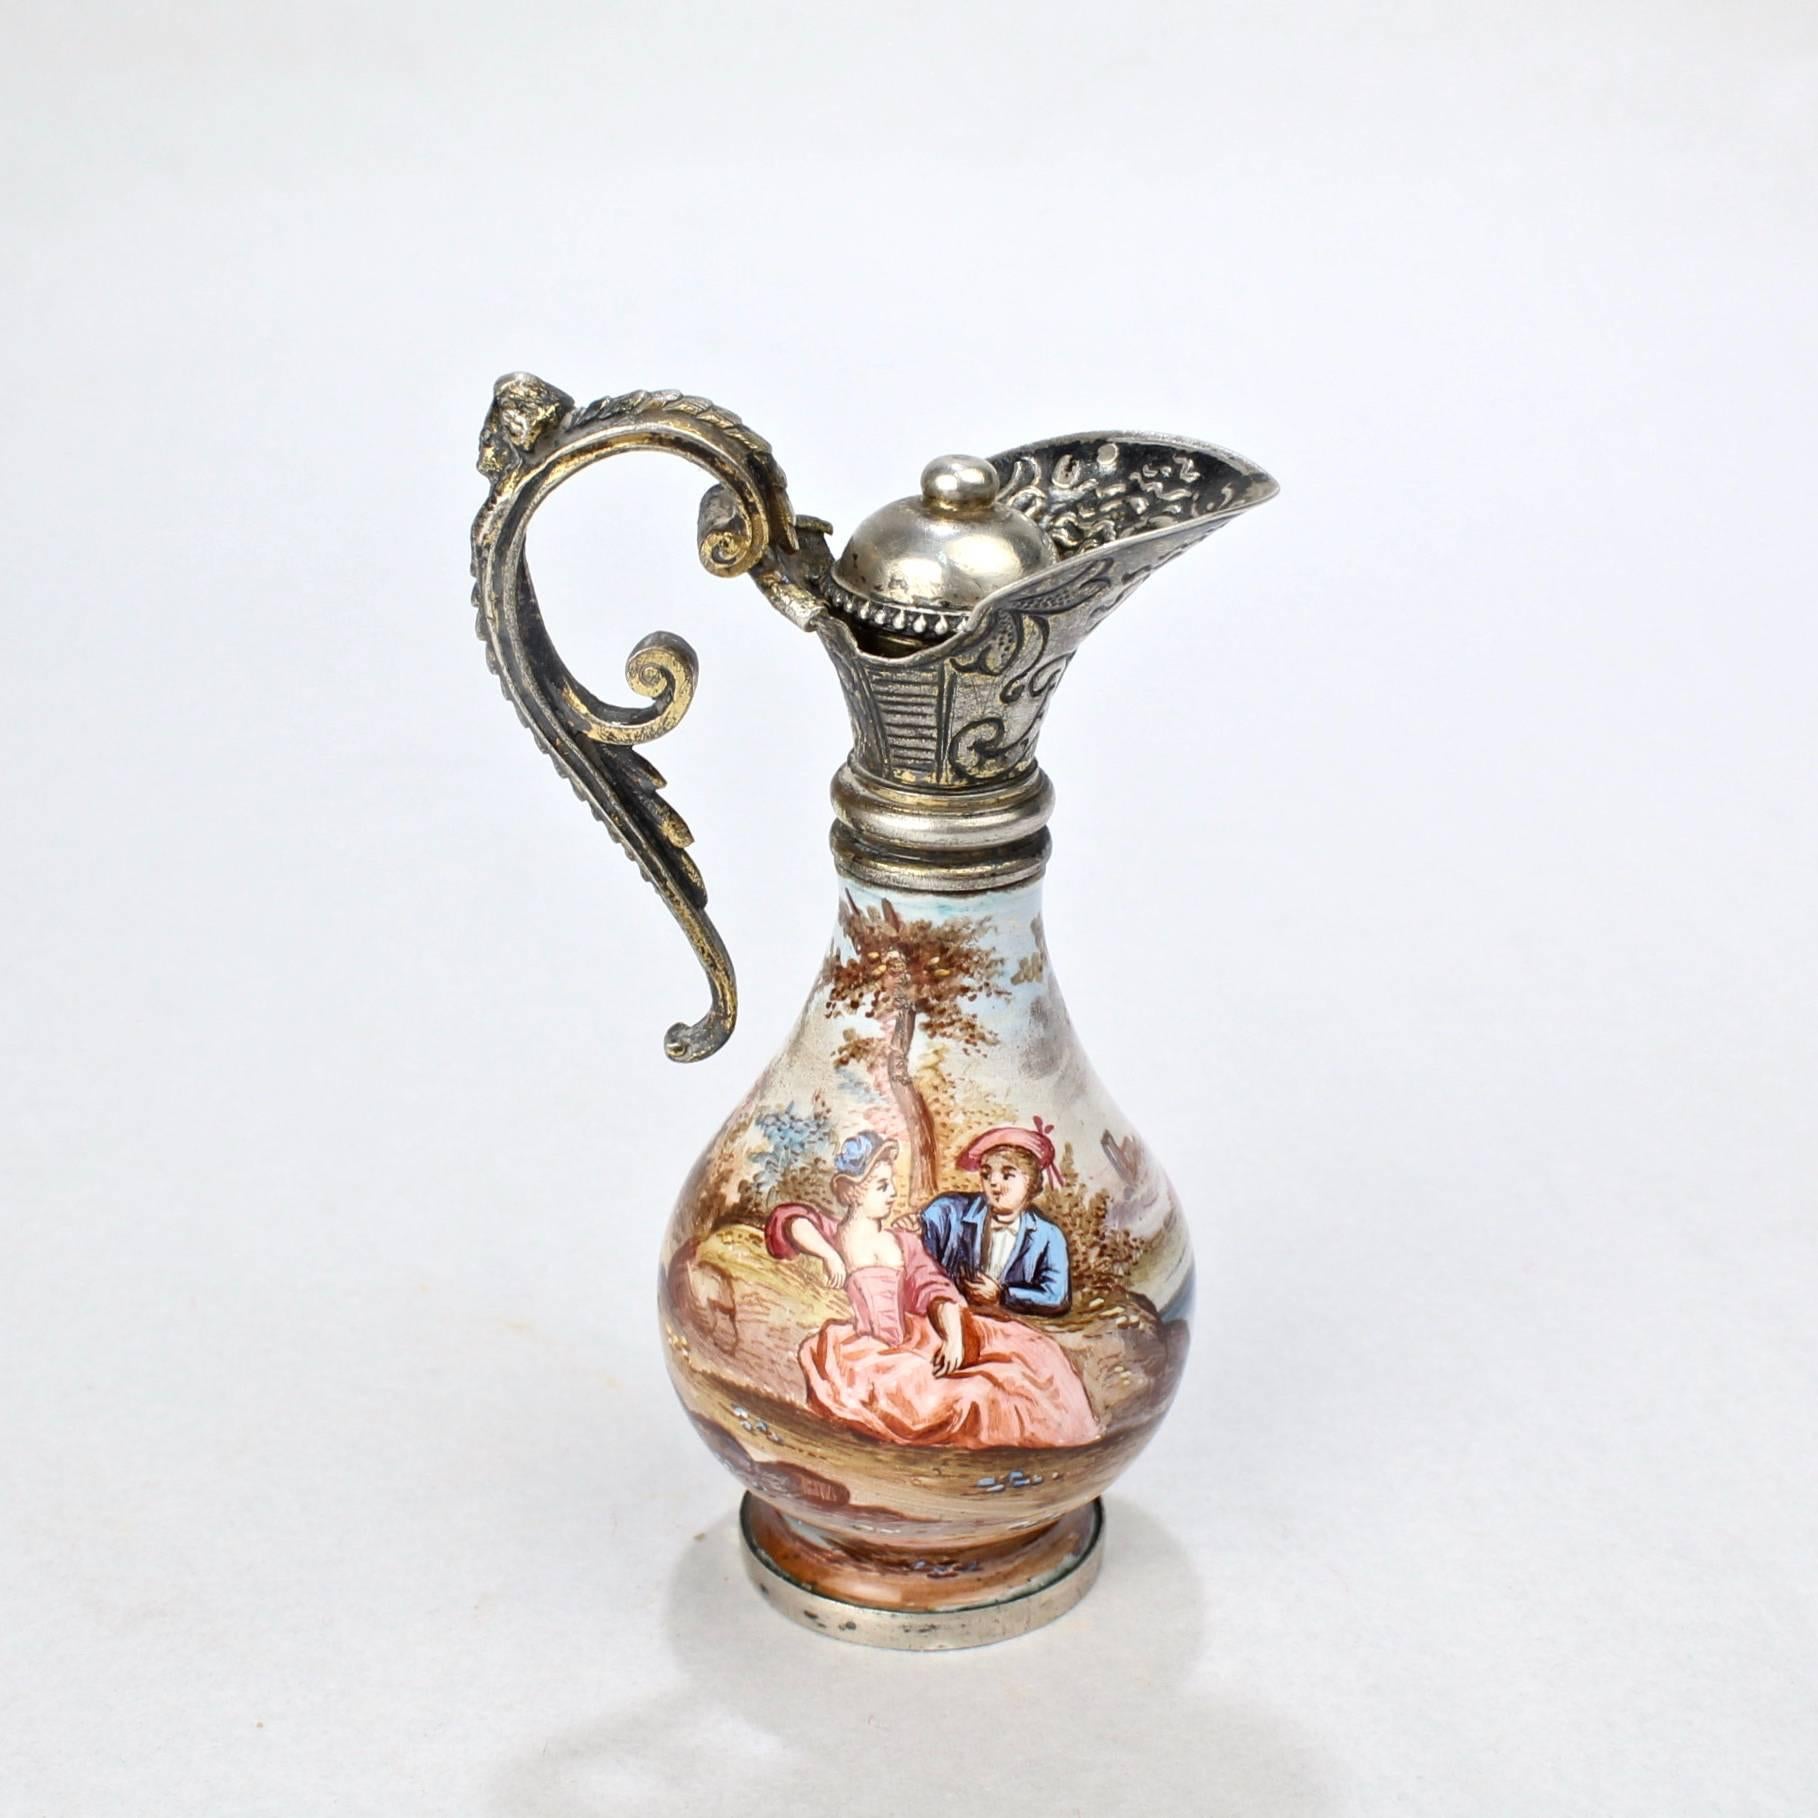 A fine antique Hermann Böhm silver and enamel scent bottle. A fantastic Kunstkammer or curiosity cabinet piece.

Depicting lovers on either side. With etched silver that were gilt at one point.

Both the base and side of the stopper are marked